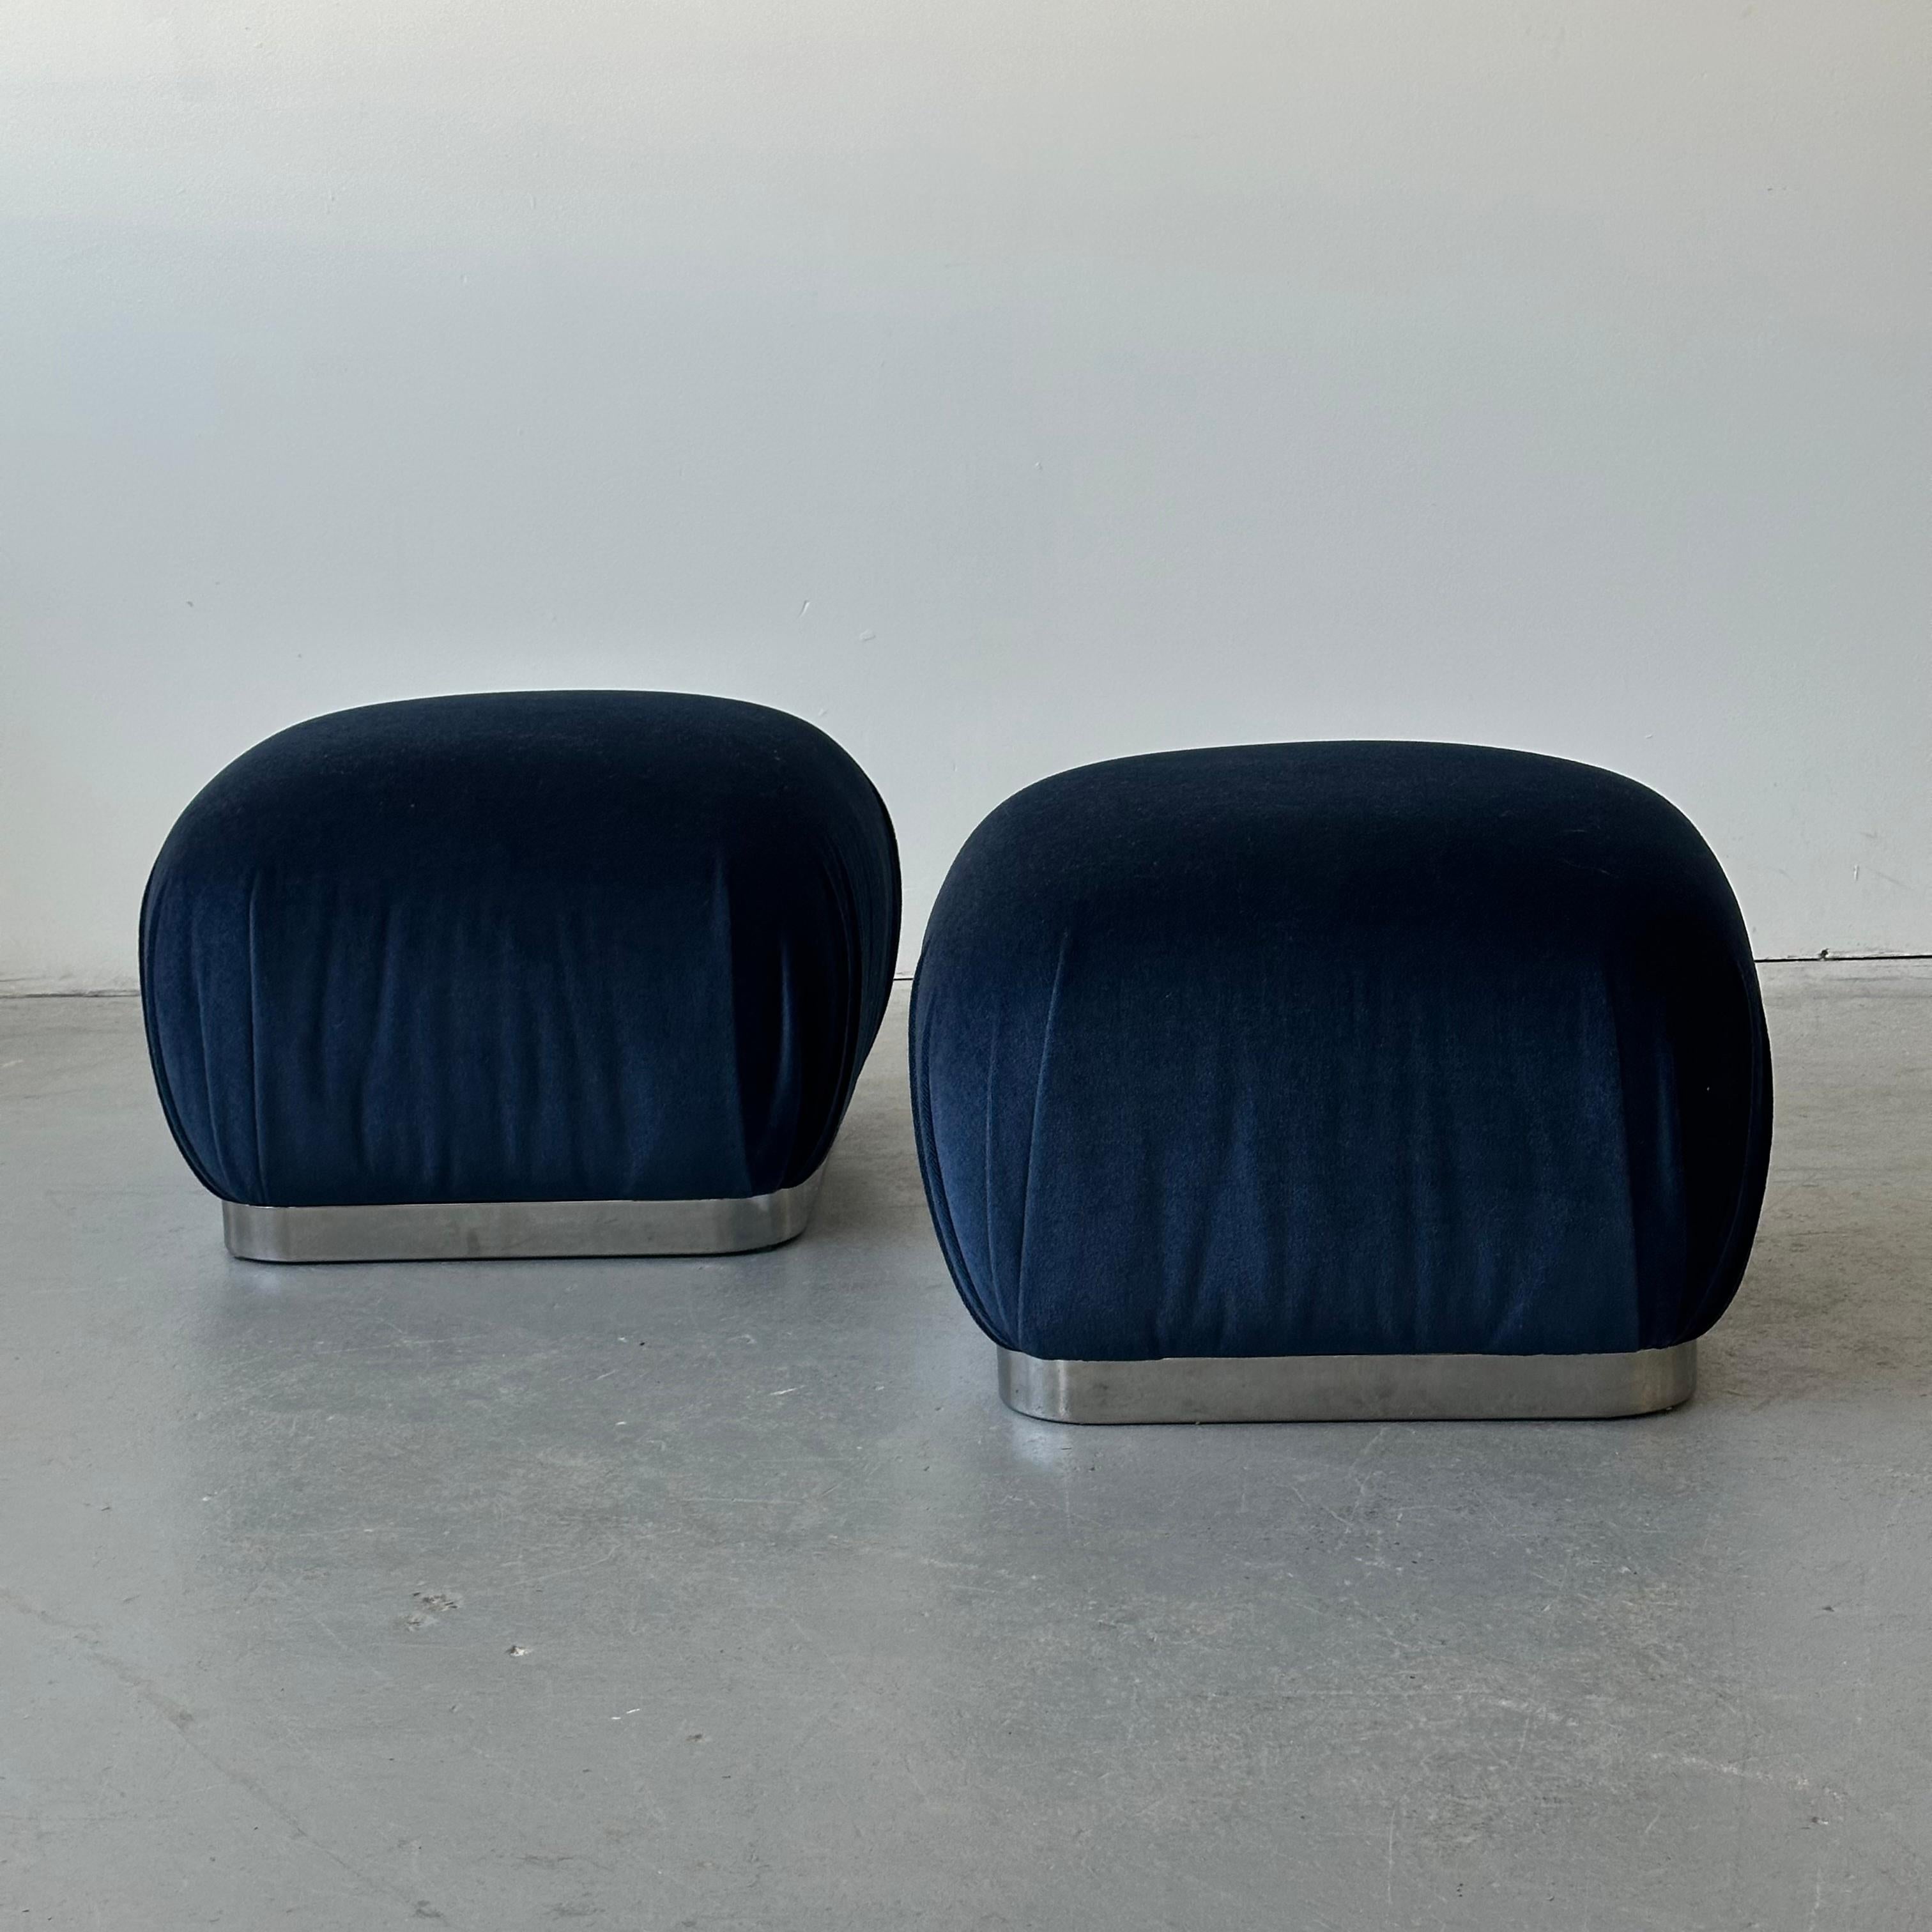 c. 1980s. Both have been reupholstered in mohair from fishman's fabrics. Featuring a comfortable upholstered seat with a steel base and hidden rubber ball castors for super smooth movement.

Price is for the set. Contact us if you'd like to purchase